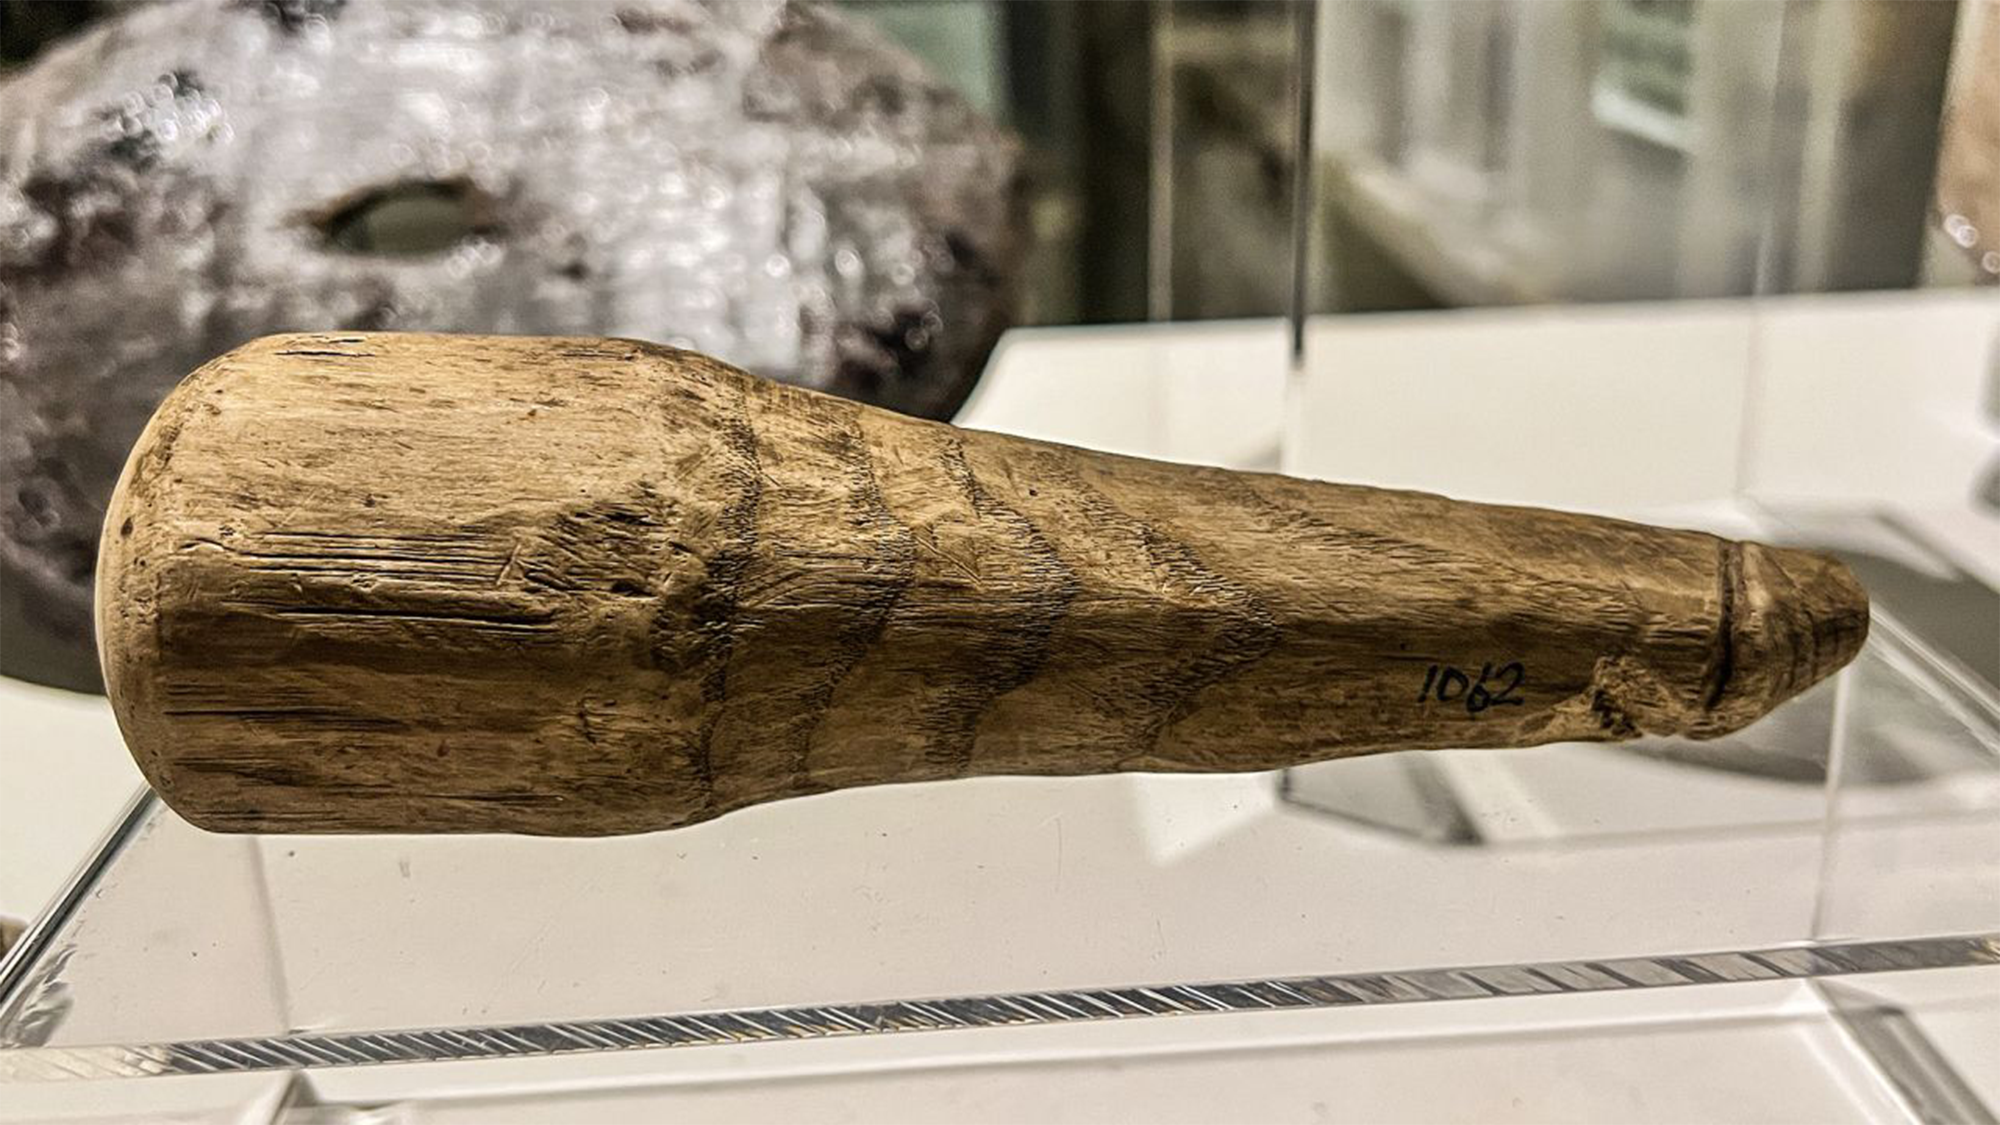 Scientists think they discovered a 2,000-year-old dildo Popular Science photo